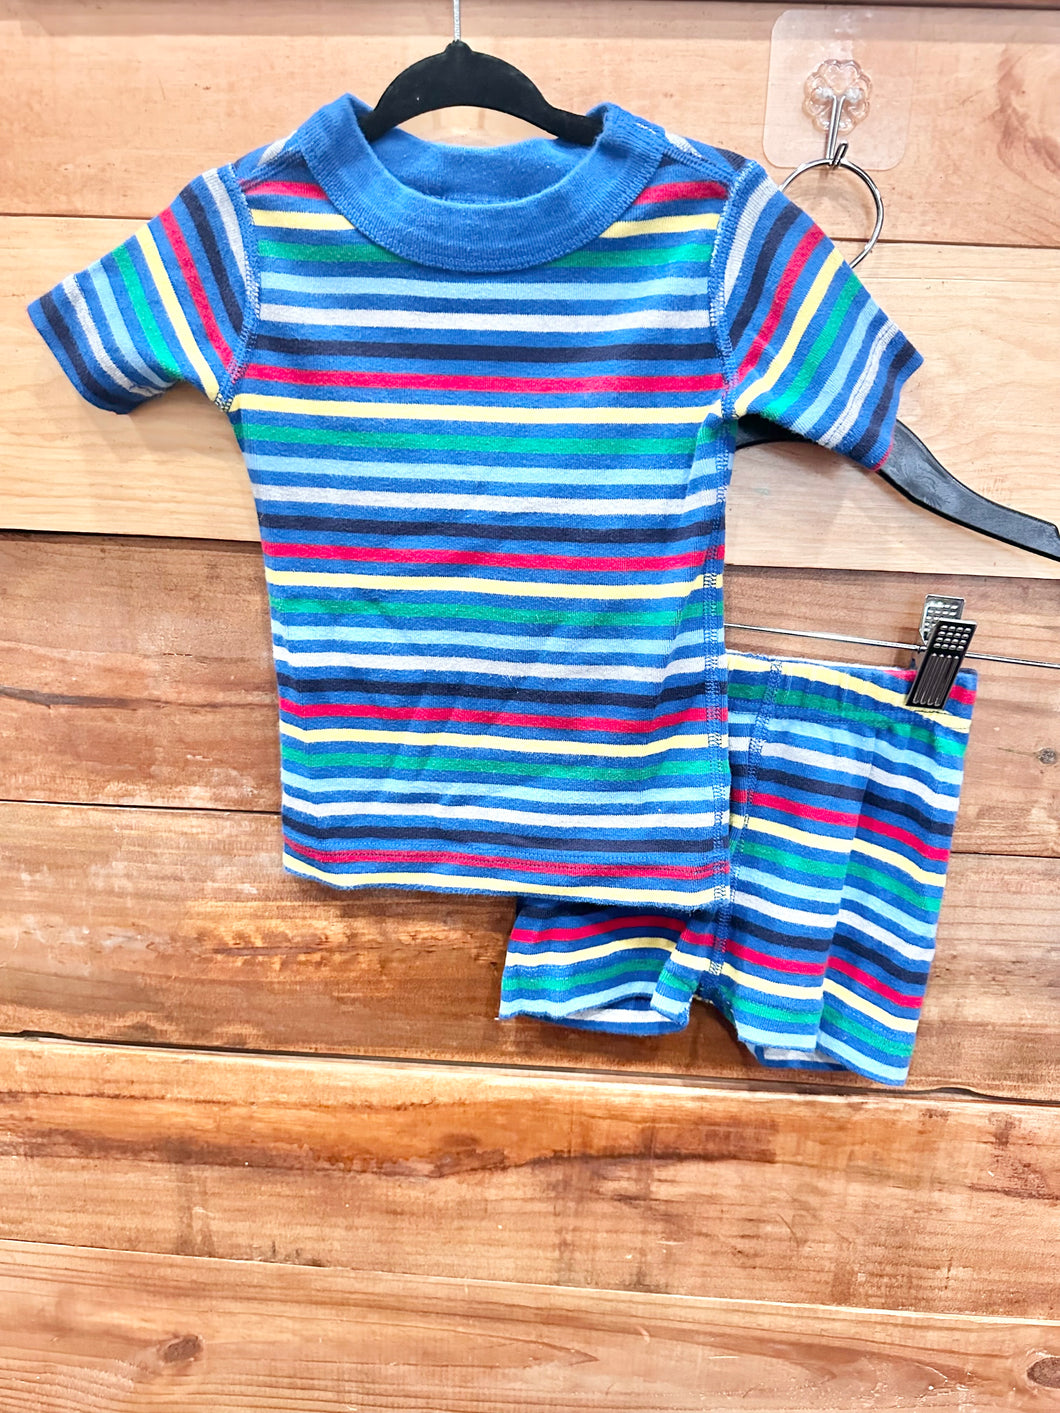 Hanna Andersson Blue Striped Pajamas Size 2T